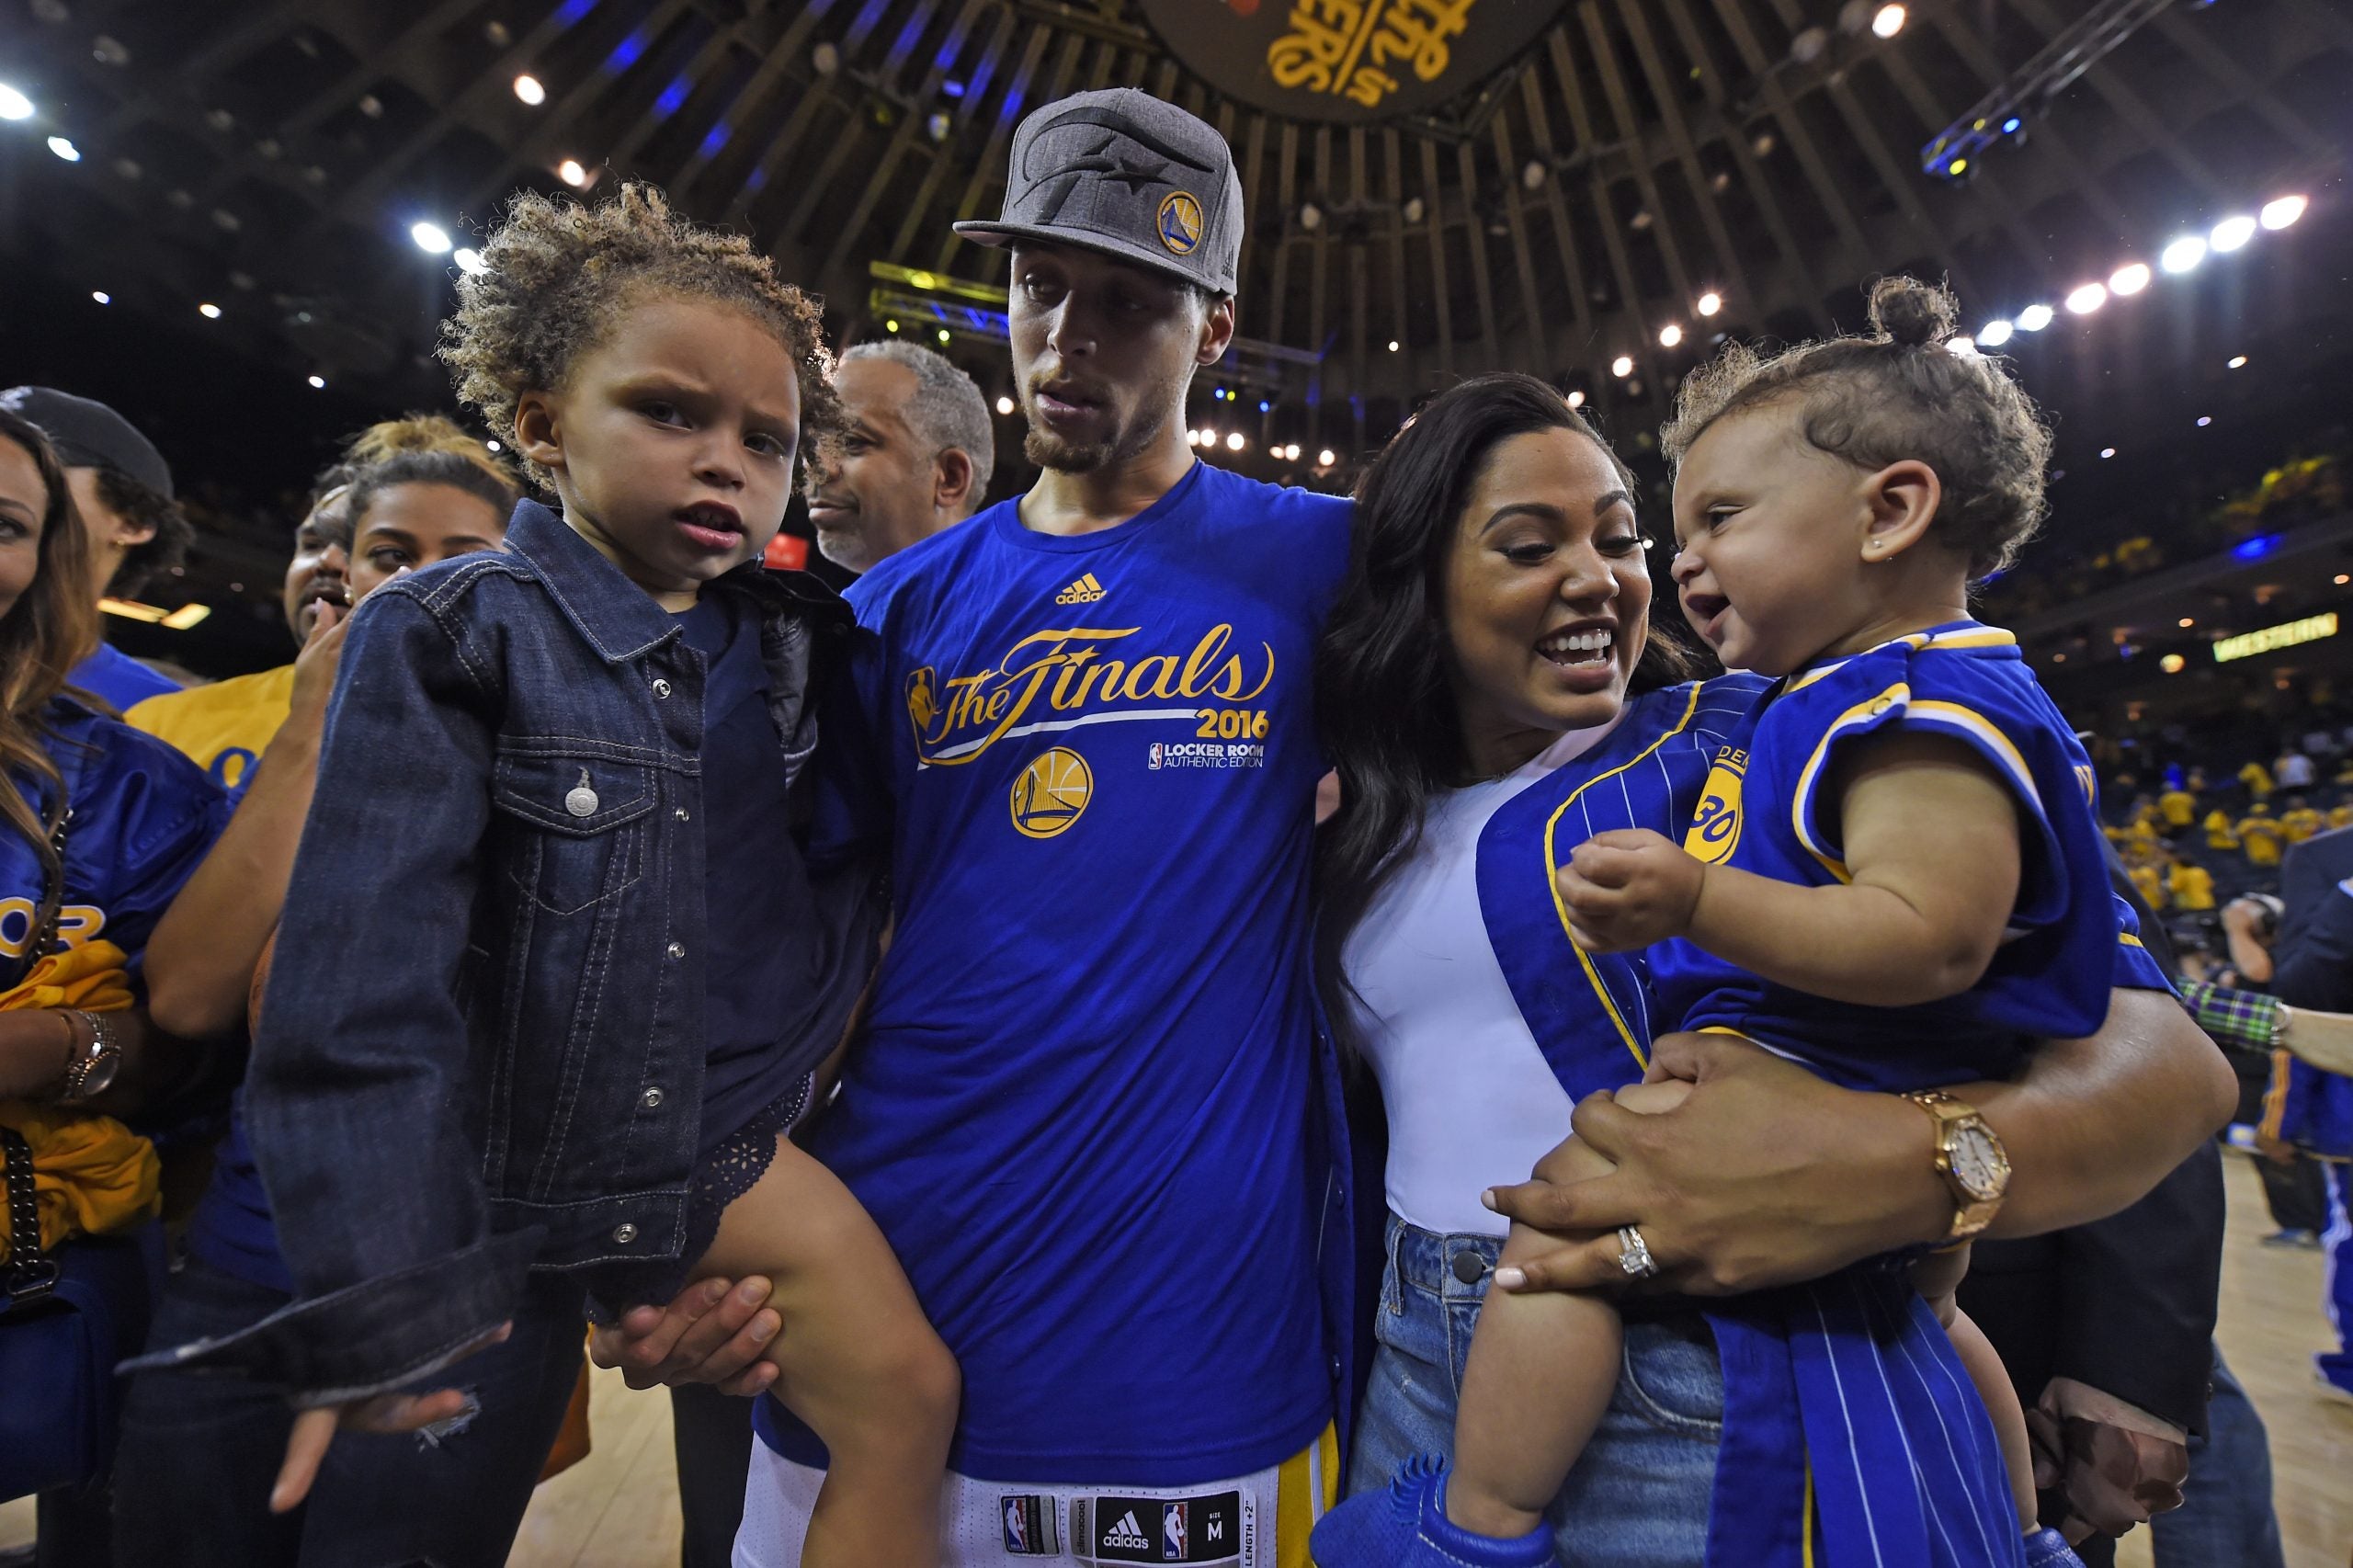 Photos Of Ayesha Curry And Her Family Over The Years